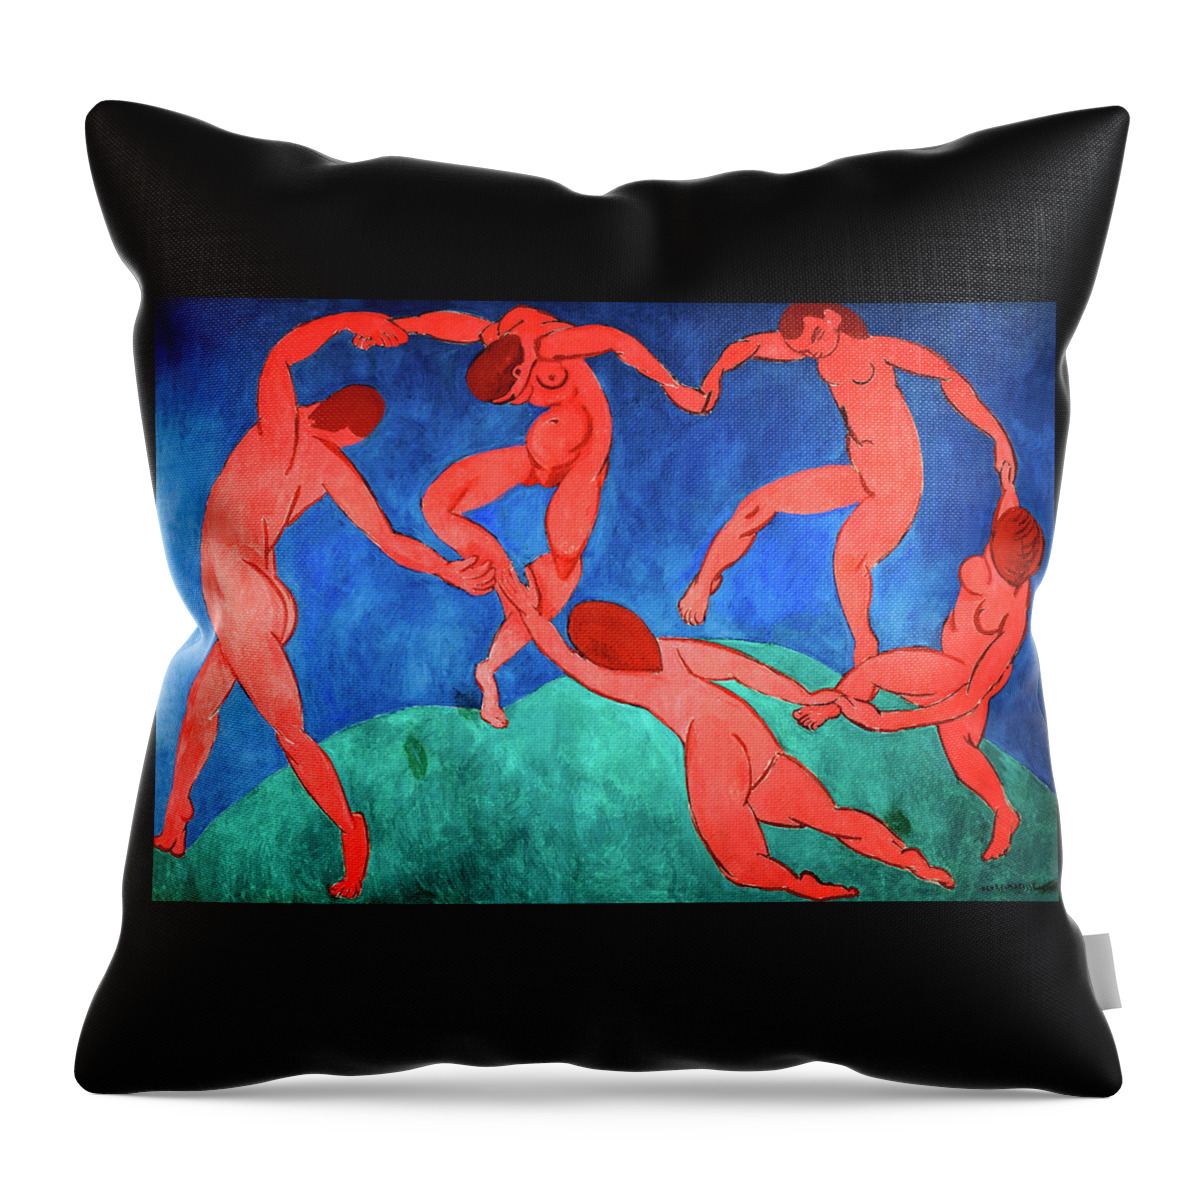 Dance Throw Pillow featuring the painting Dance La Danse by Henri Matisse 1910 by Henri matisse